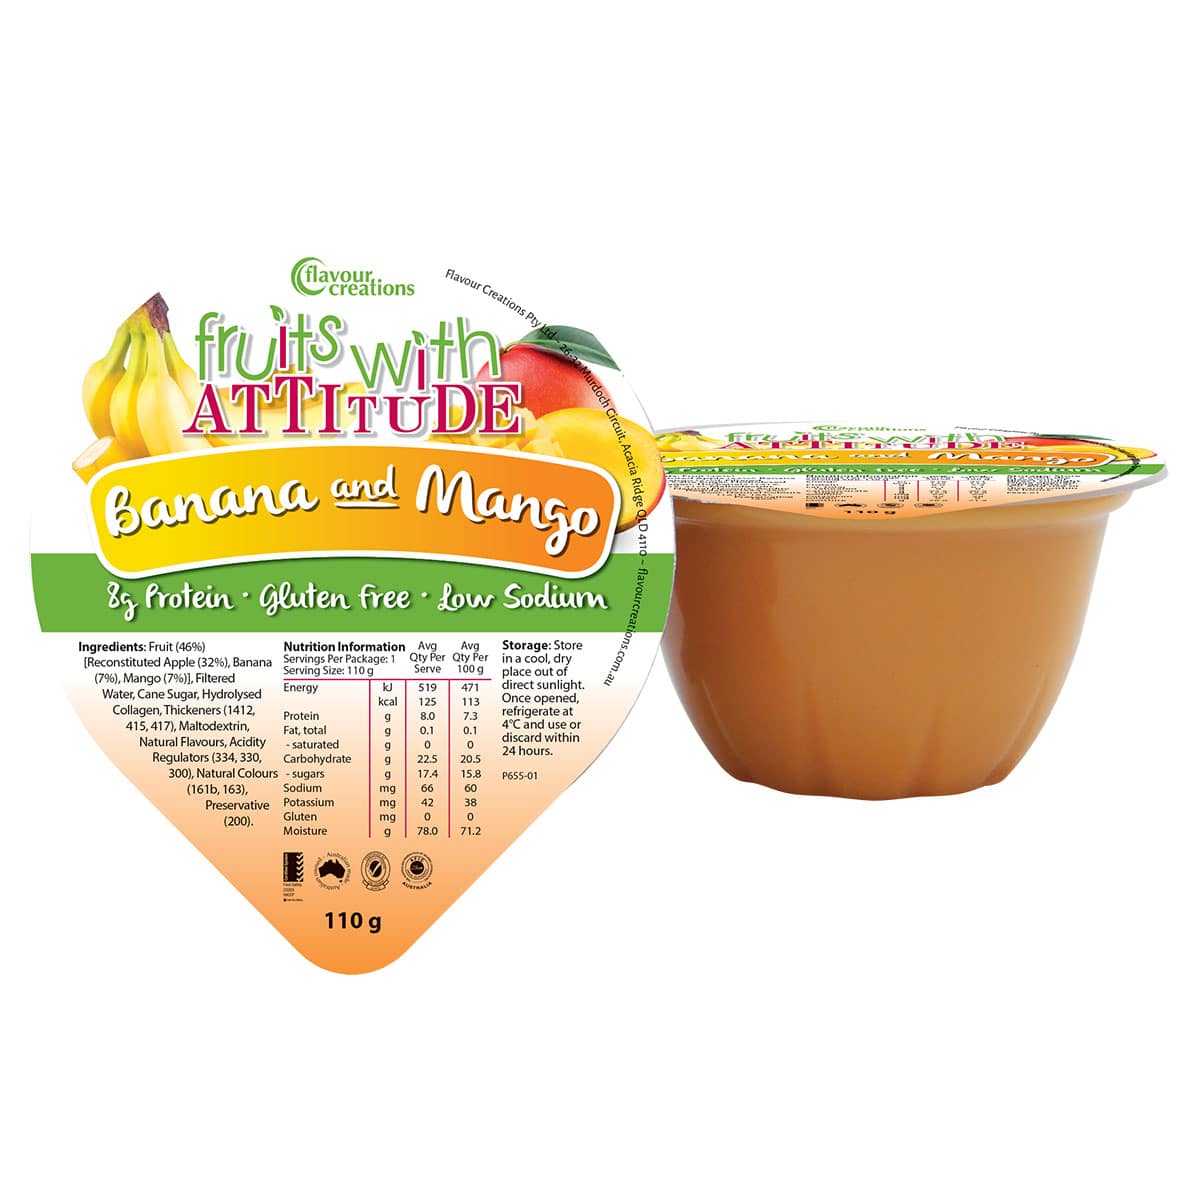 Flavour Creations Banana and Mango Pureed Fruits With Attitude - 110g